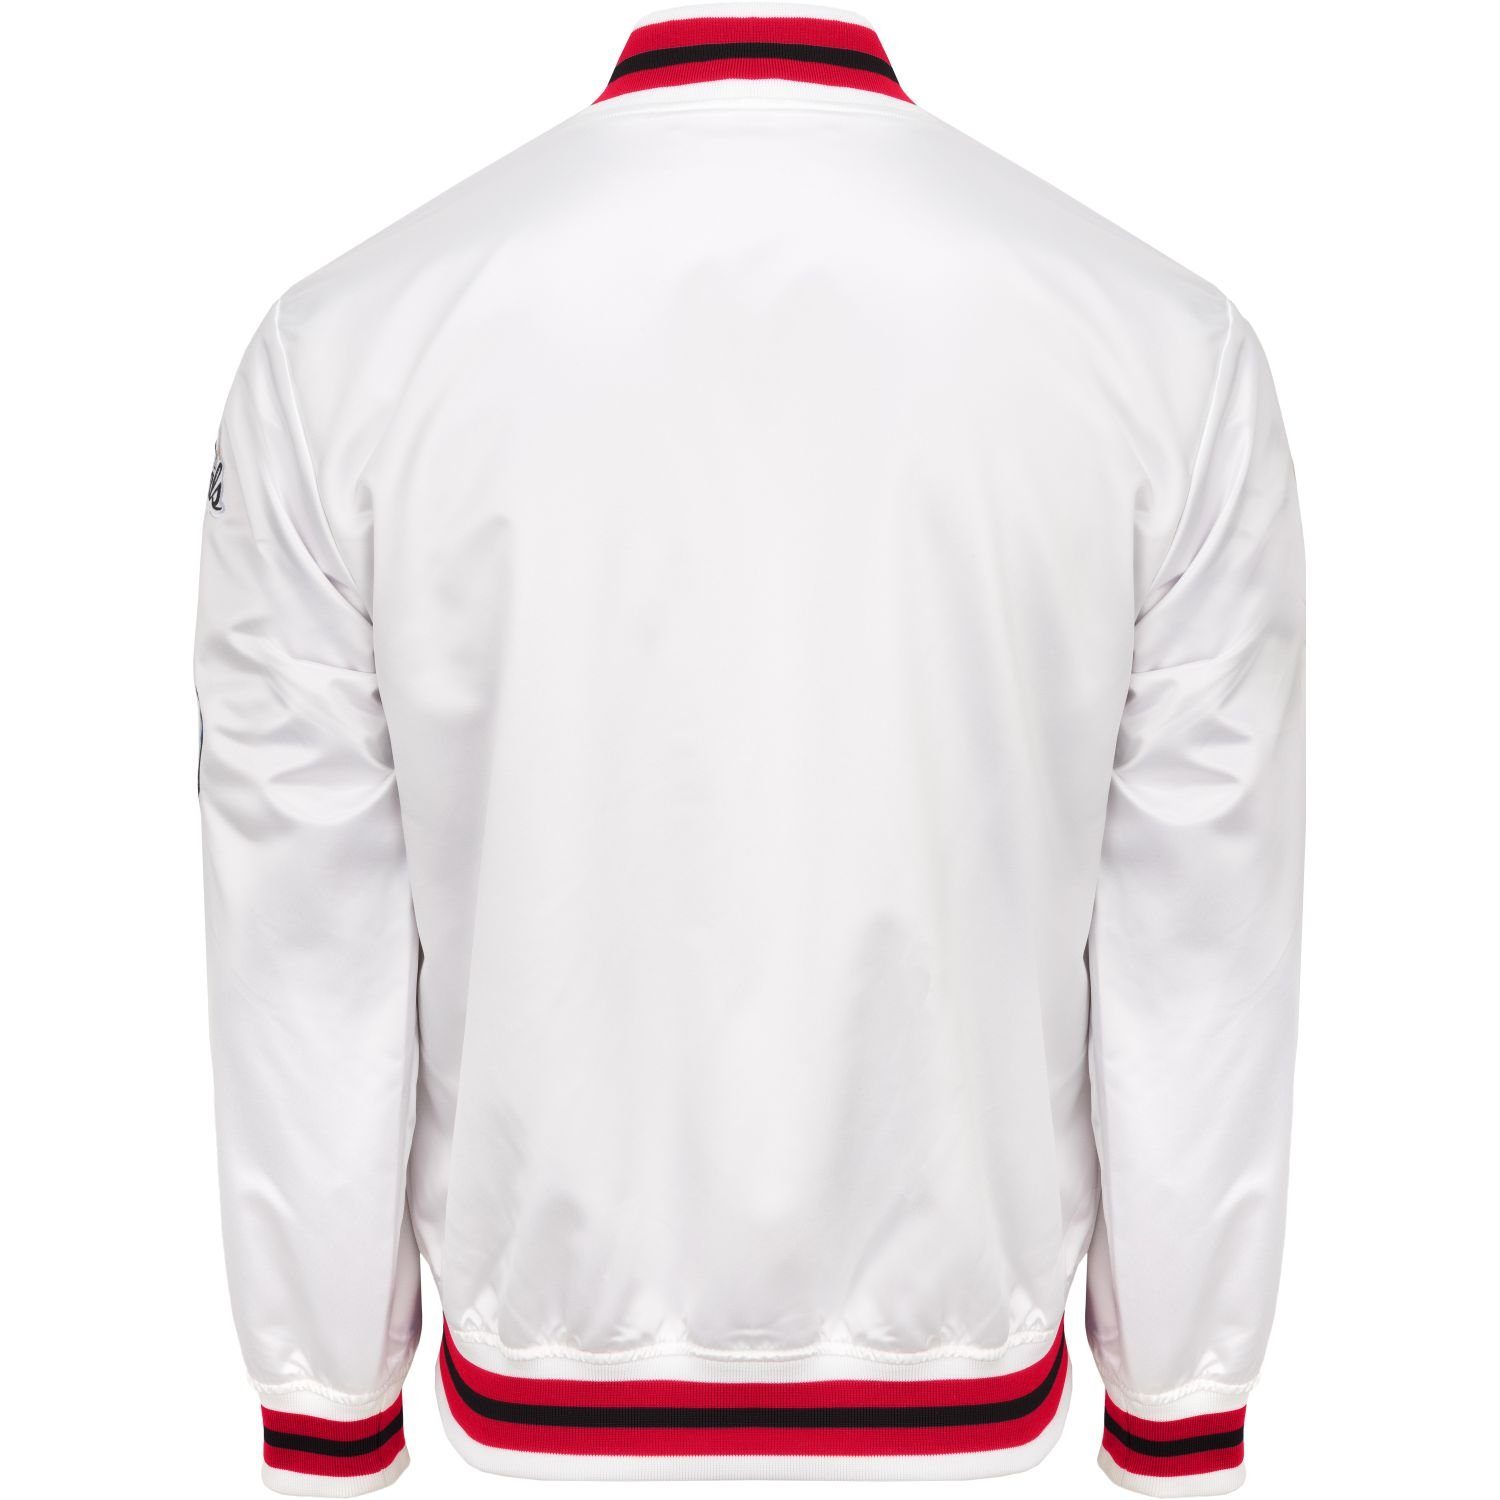 Heat Mitchell Miami & Ness Collection Collegejacke Satin City